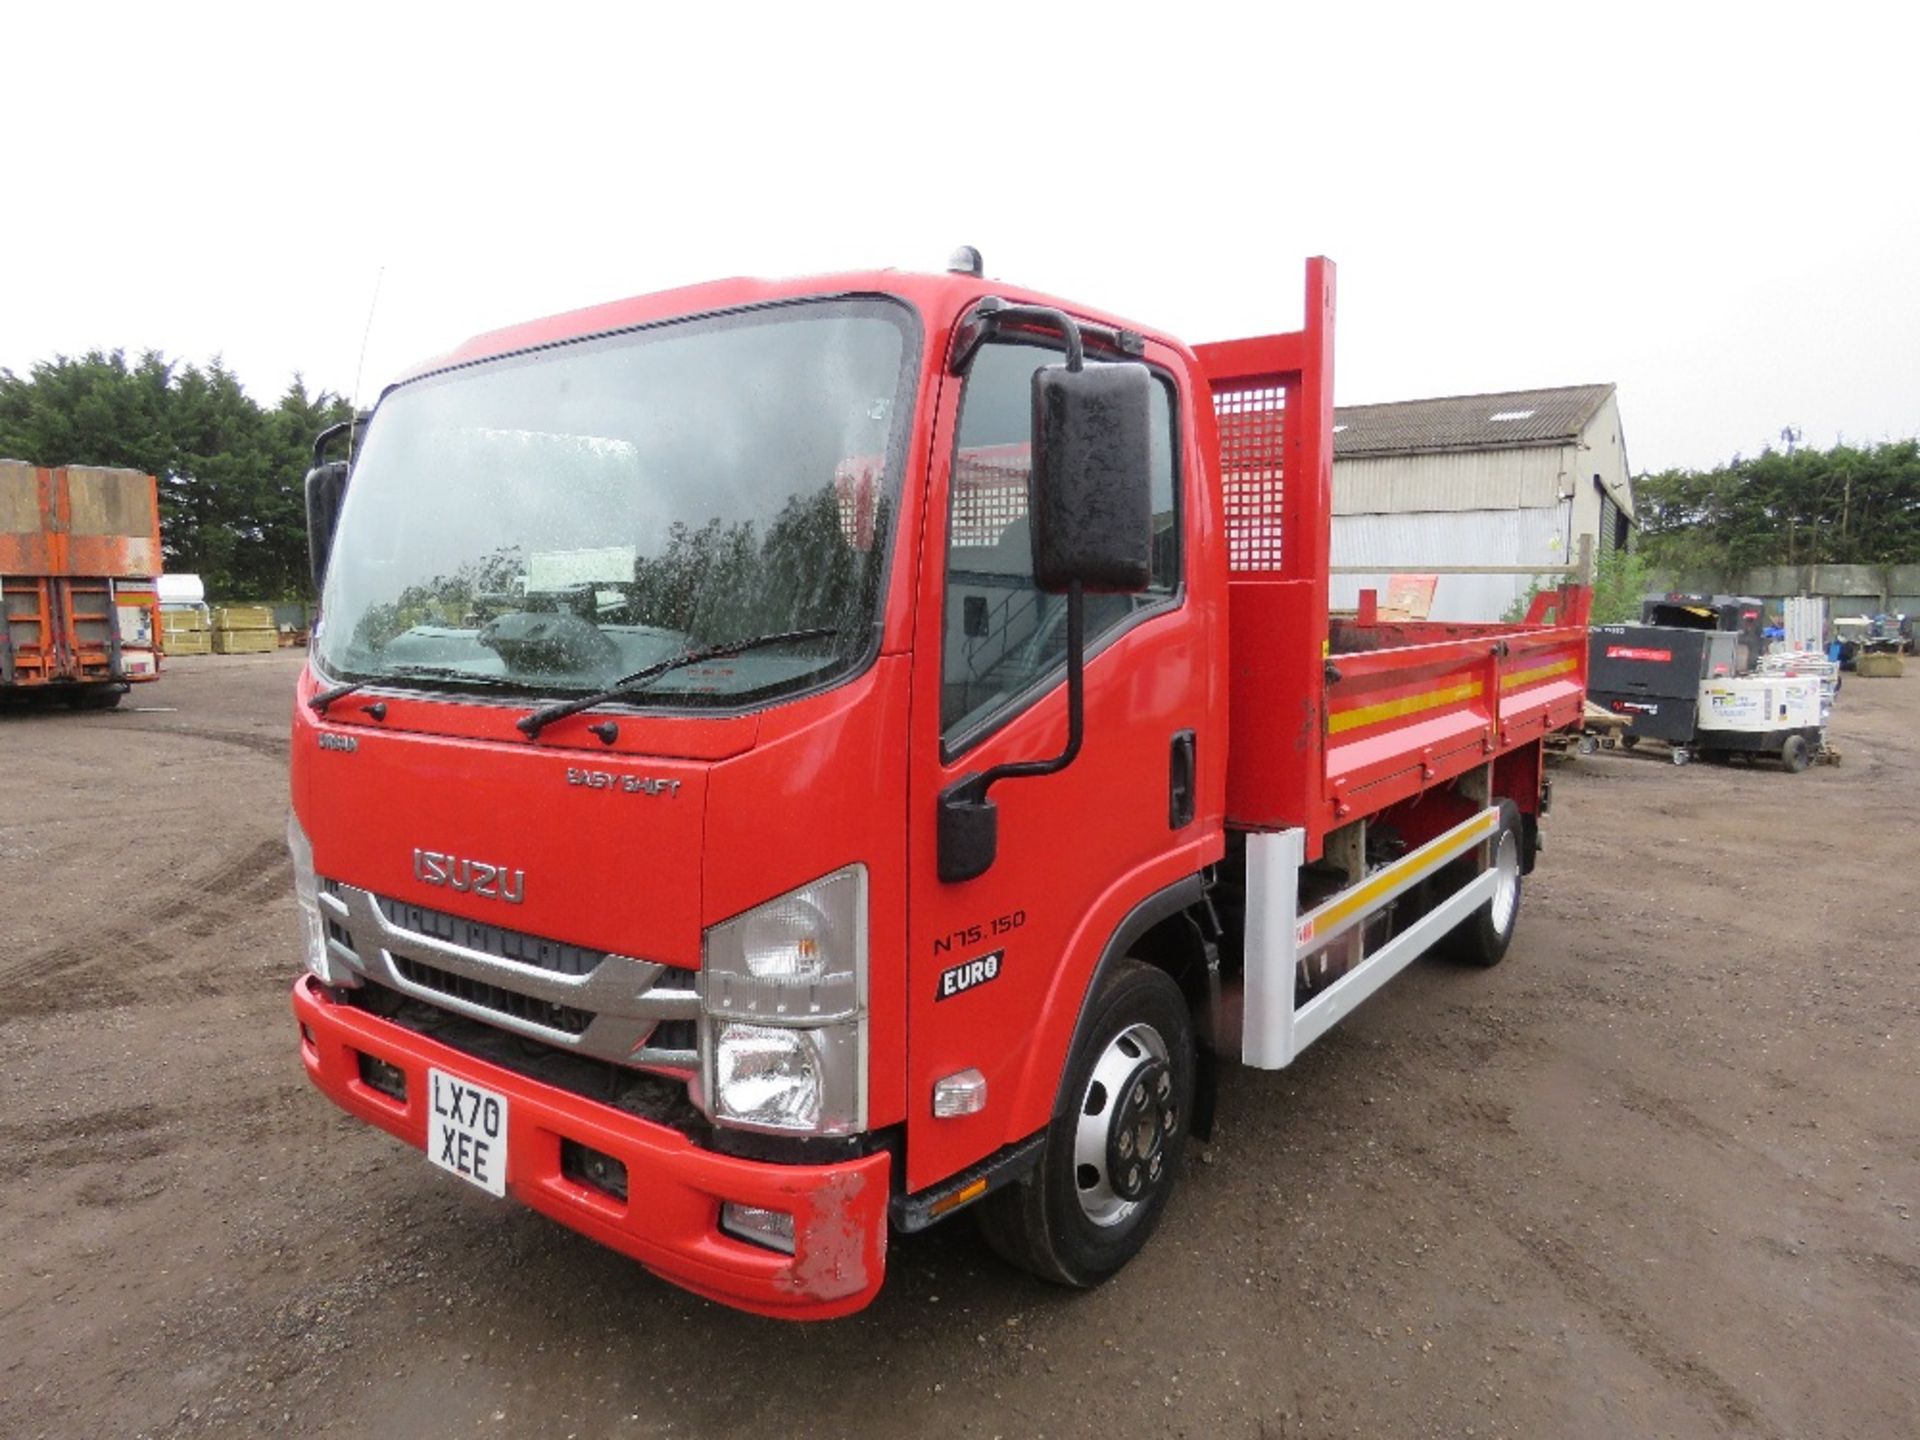 ISUZU N75.150 TIPPER LORRY REG:LX70 XEE. WITH V5, ONE RECORDED KEEPER, D.O.R:01/09/20. SOURCED FROM - Image 3 of 19